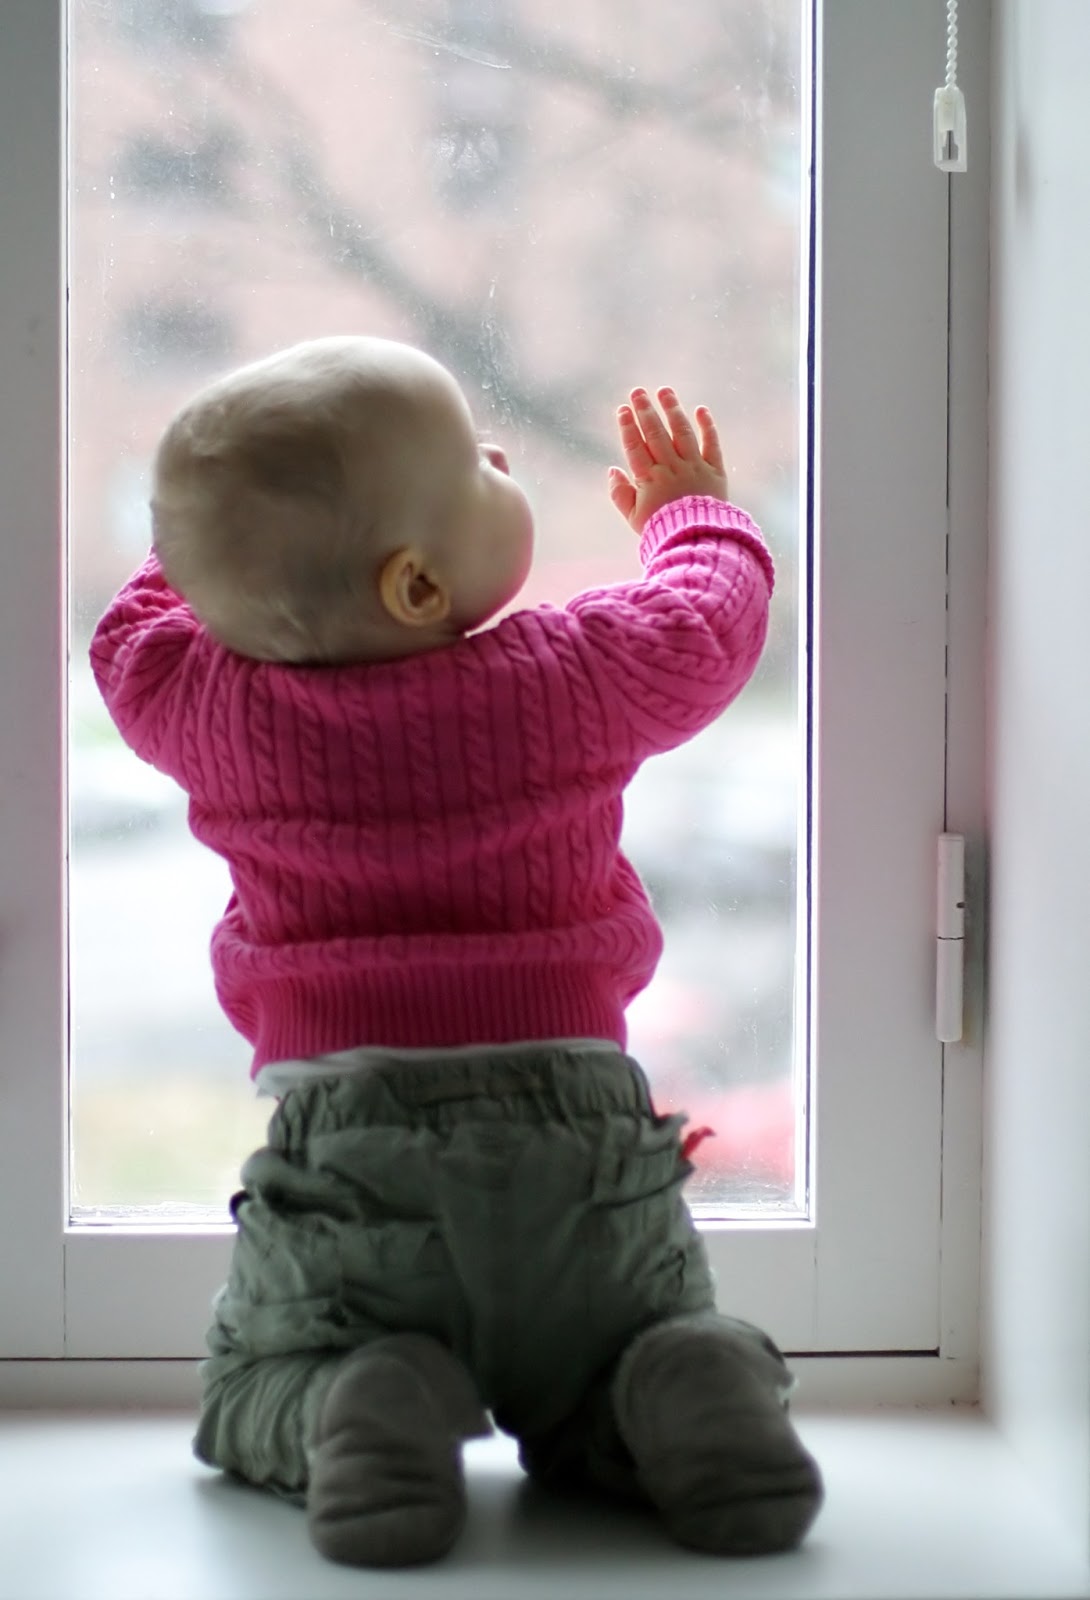 Architectural Products Blog: Pediatric Injuries Due to Window Falls ...